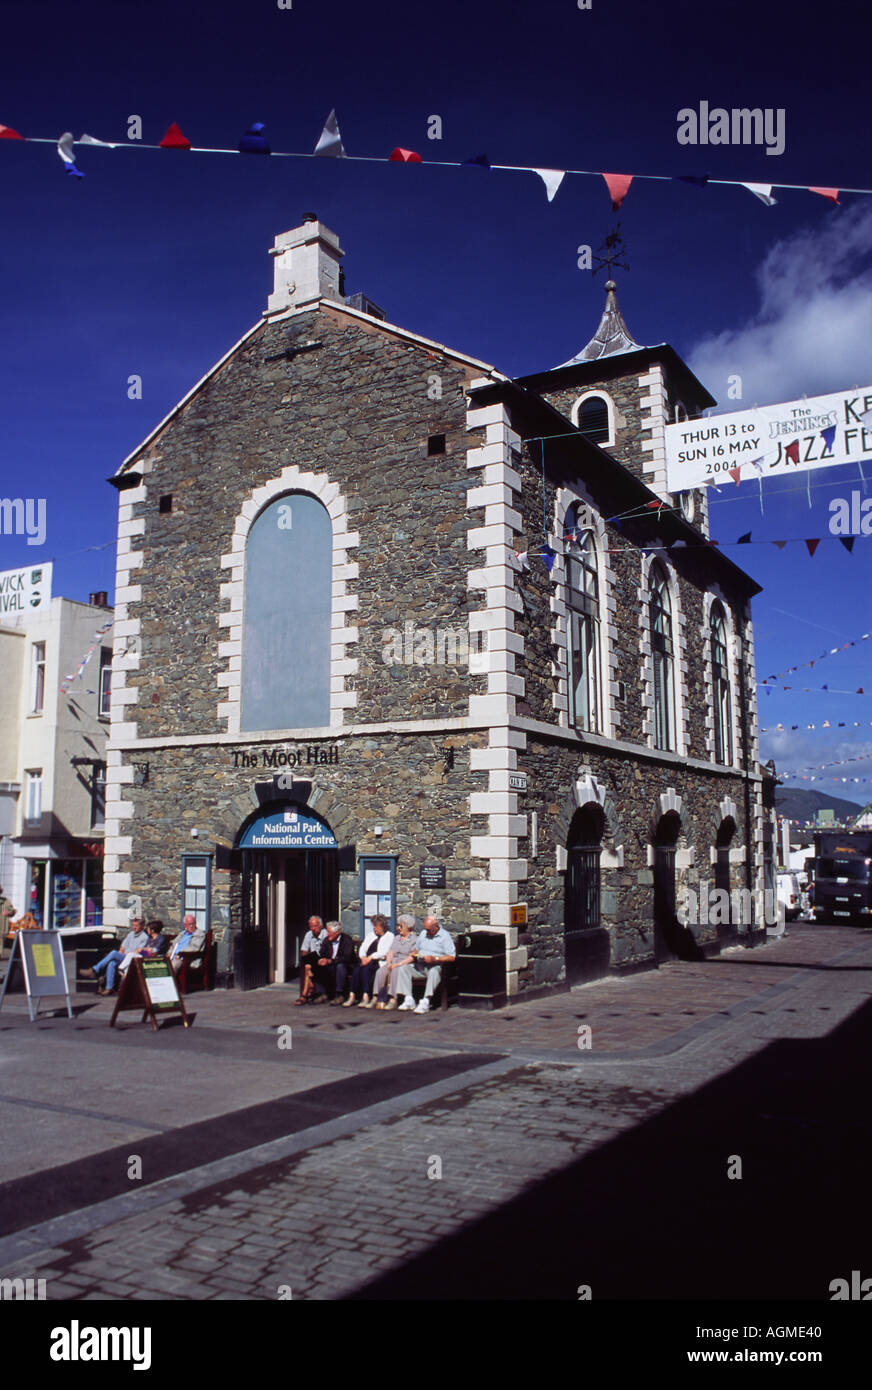 The Moot Hall Keswick Cumbria with Bunting for Jazz Festival Stock Photo